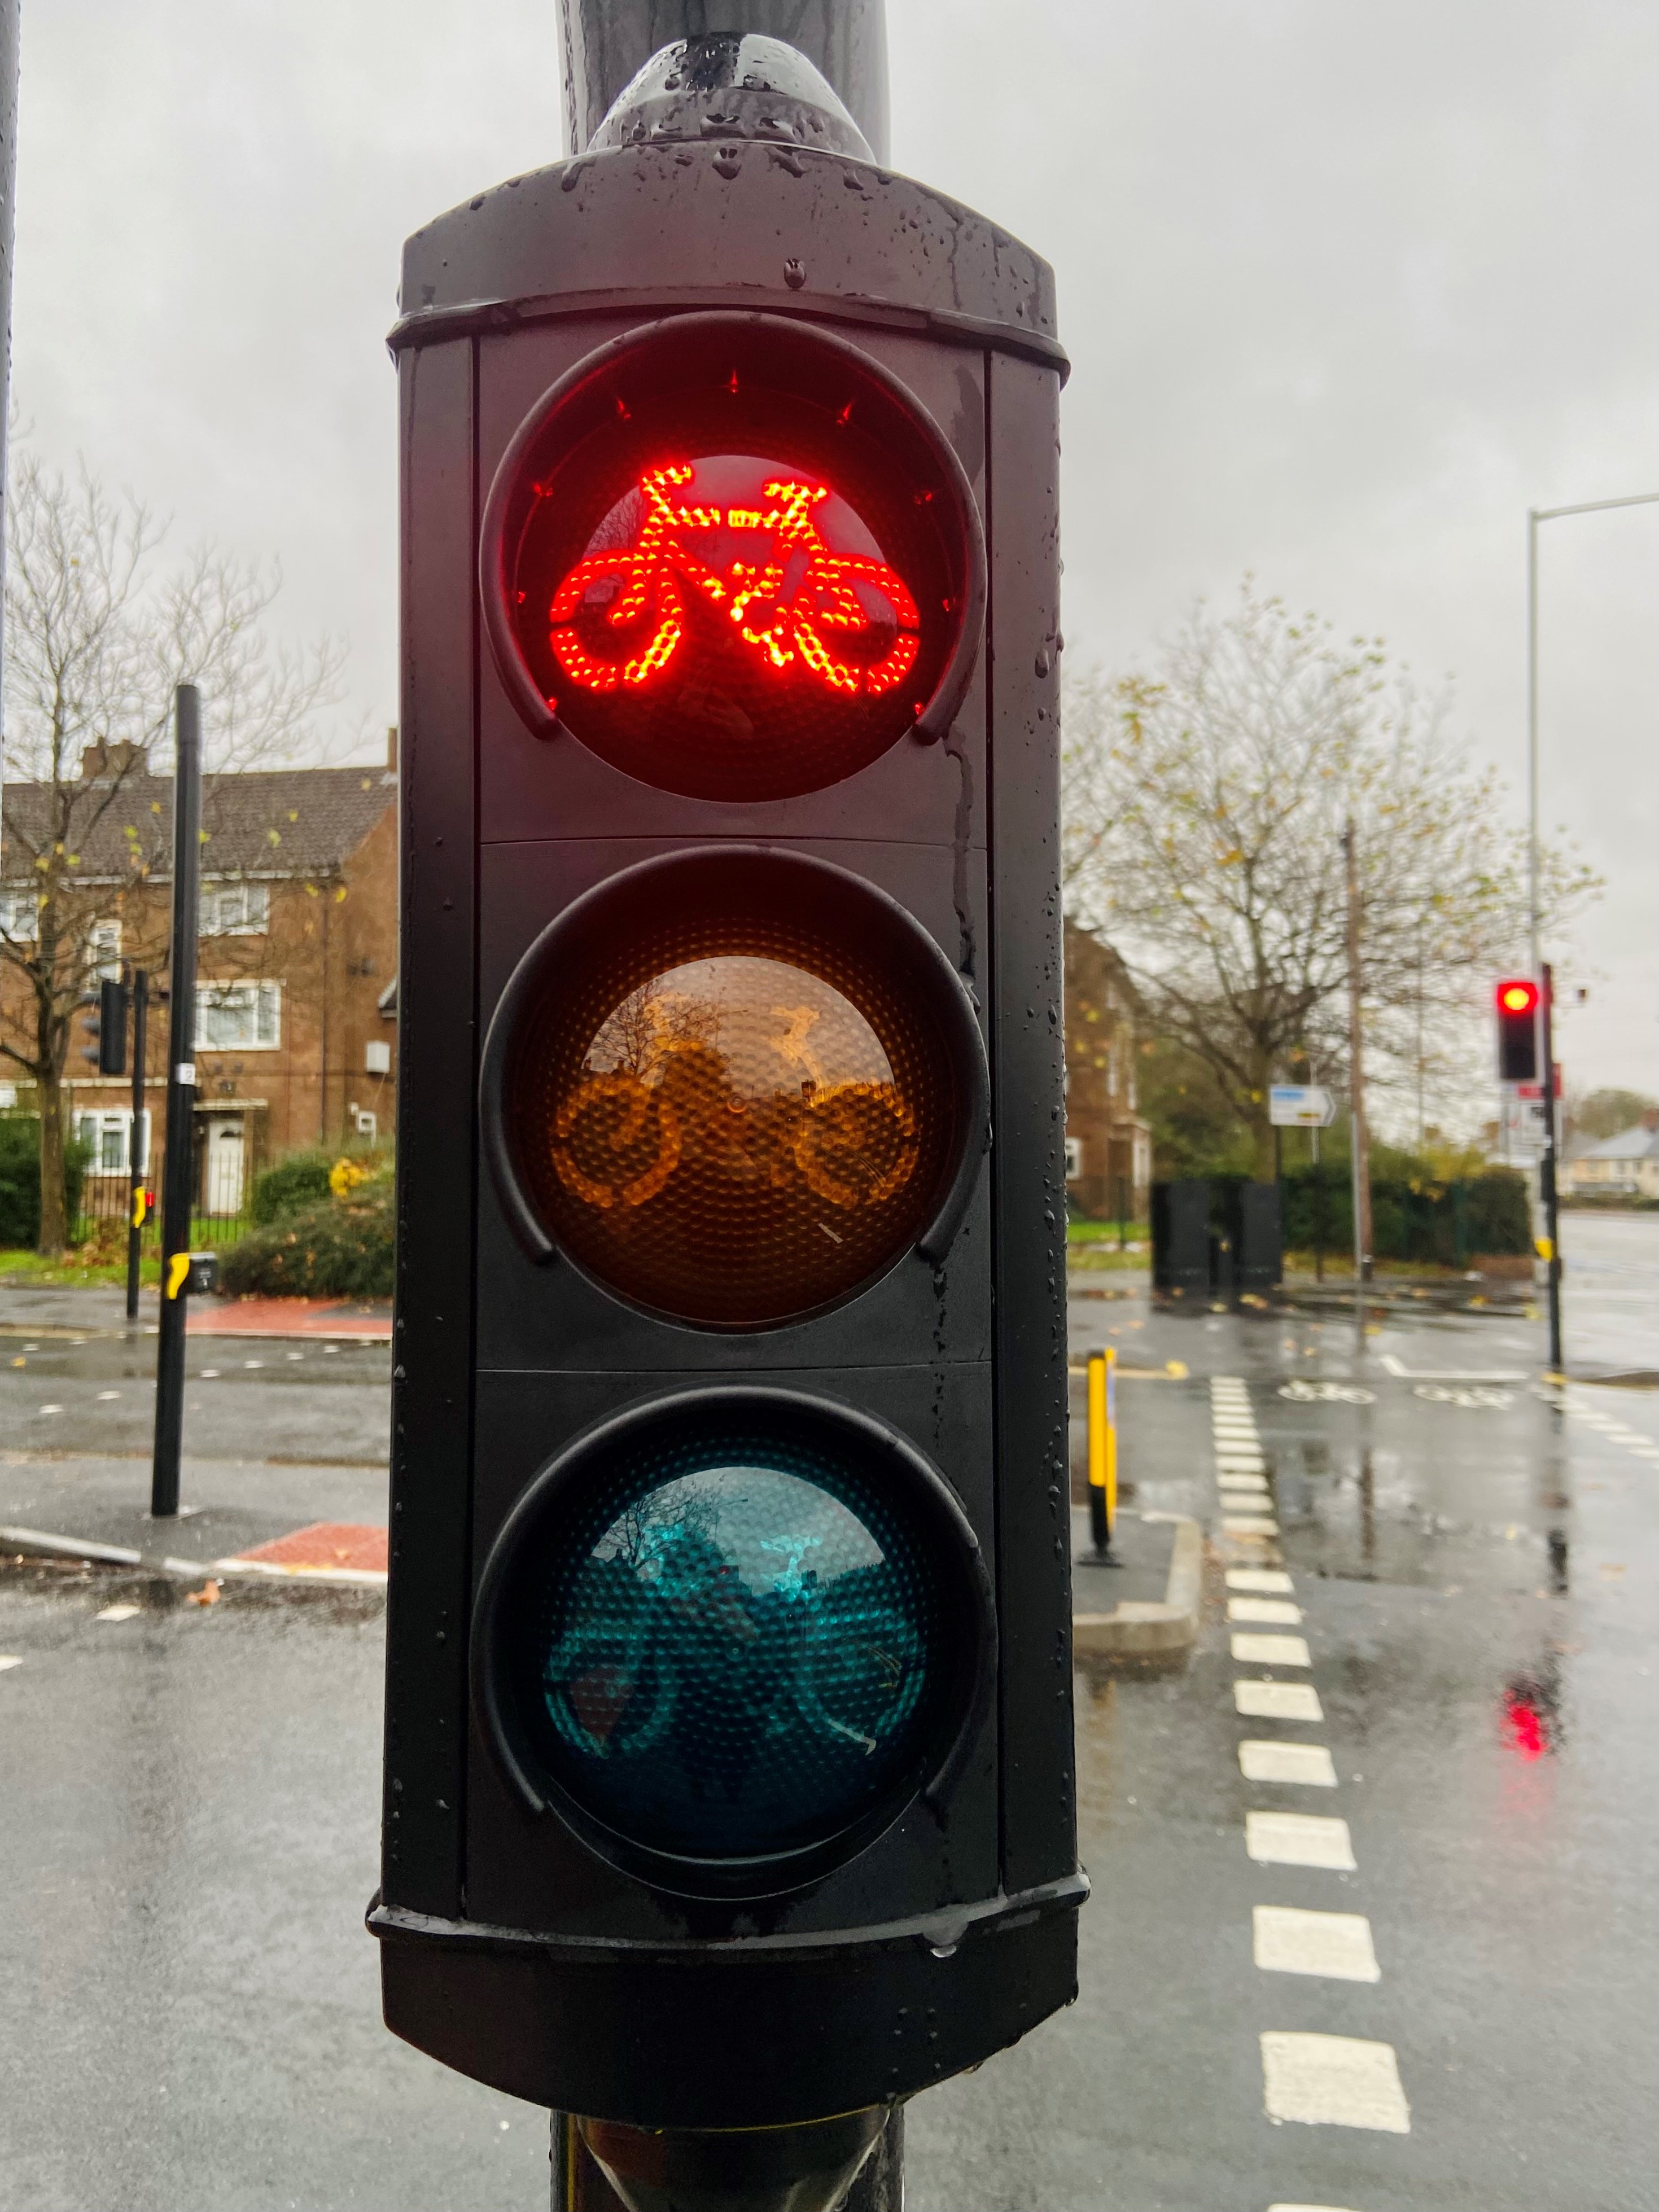 Image shows a controlled crossing light for cyclists.